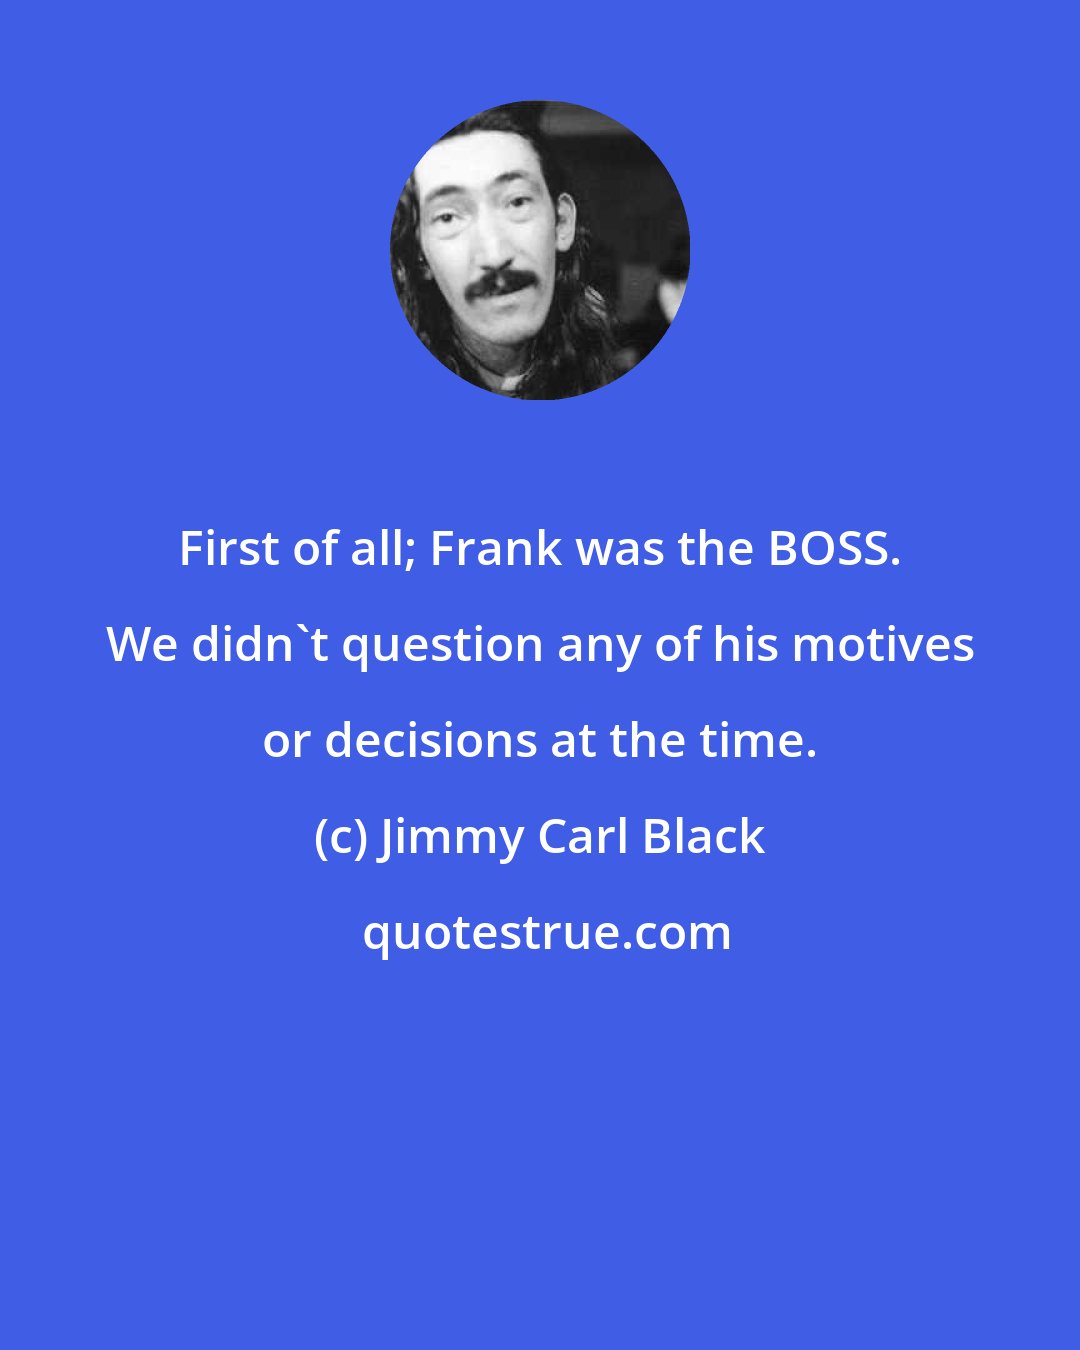 Jimmy Carl Black: First of all; Frank was the BOSS. We didn't question any of his motives or decisions at the time.